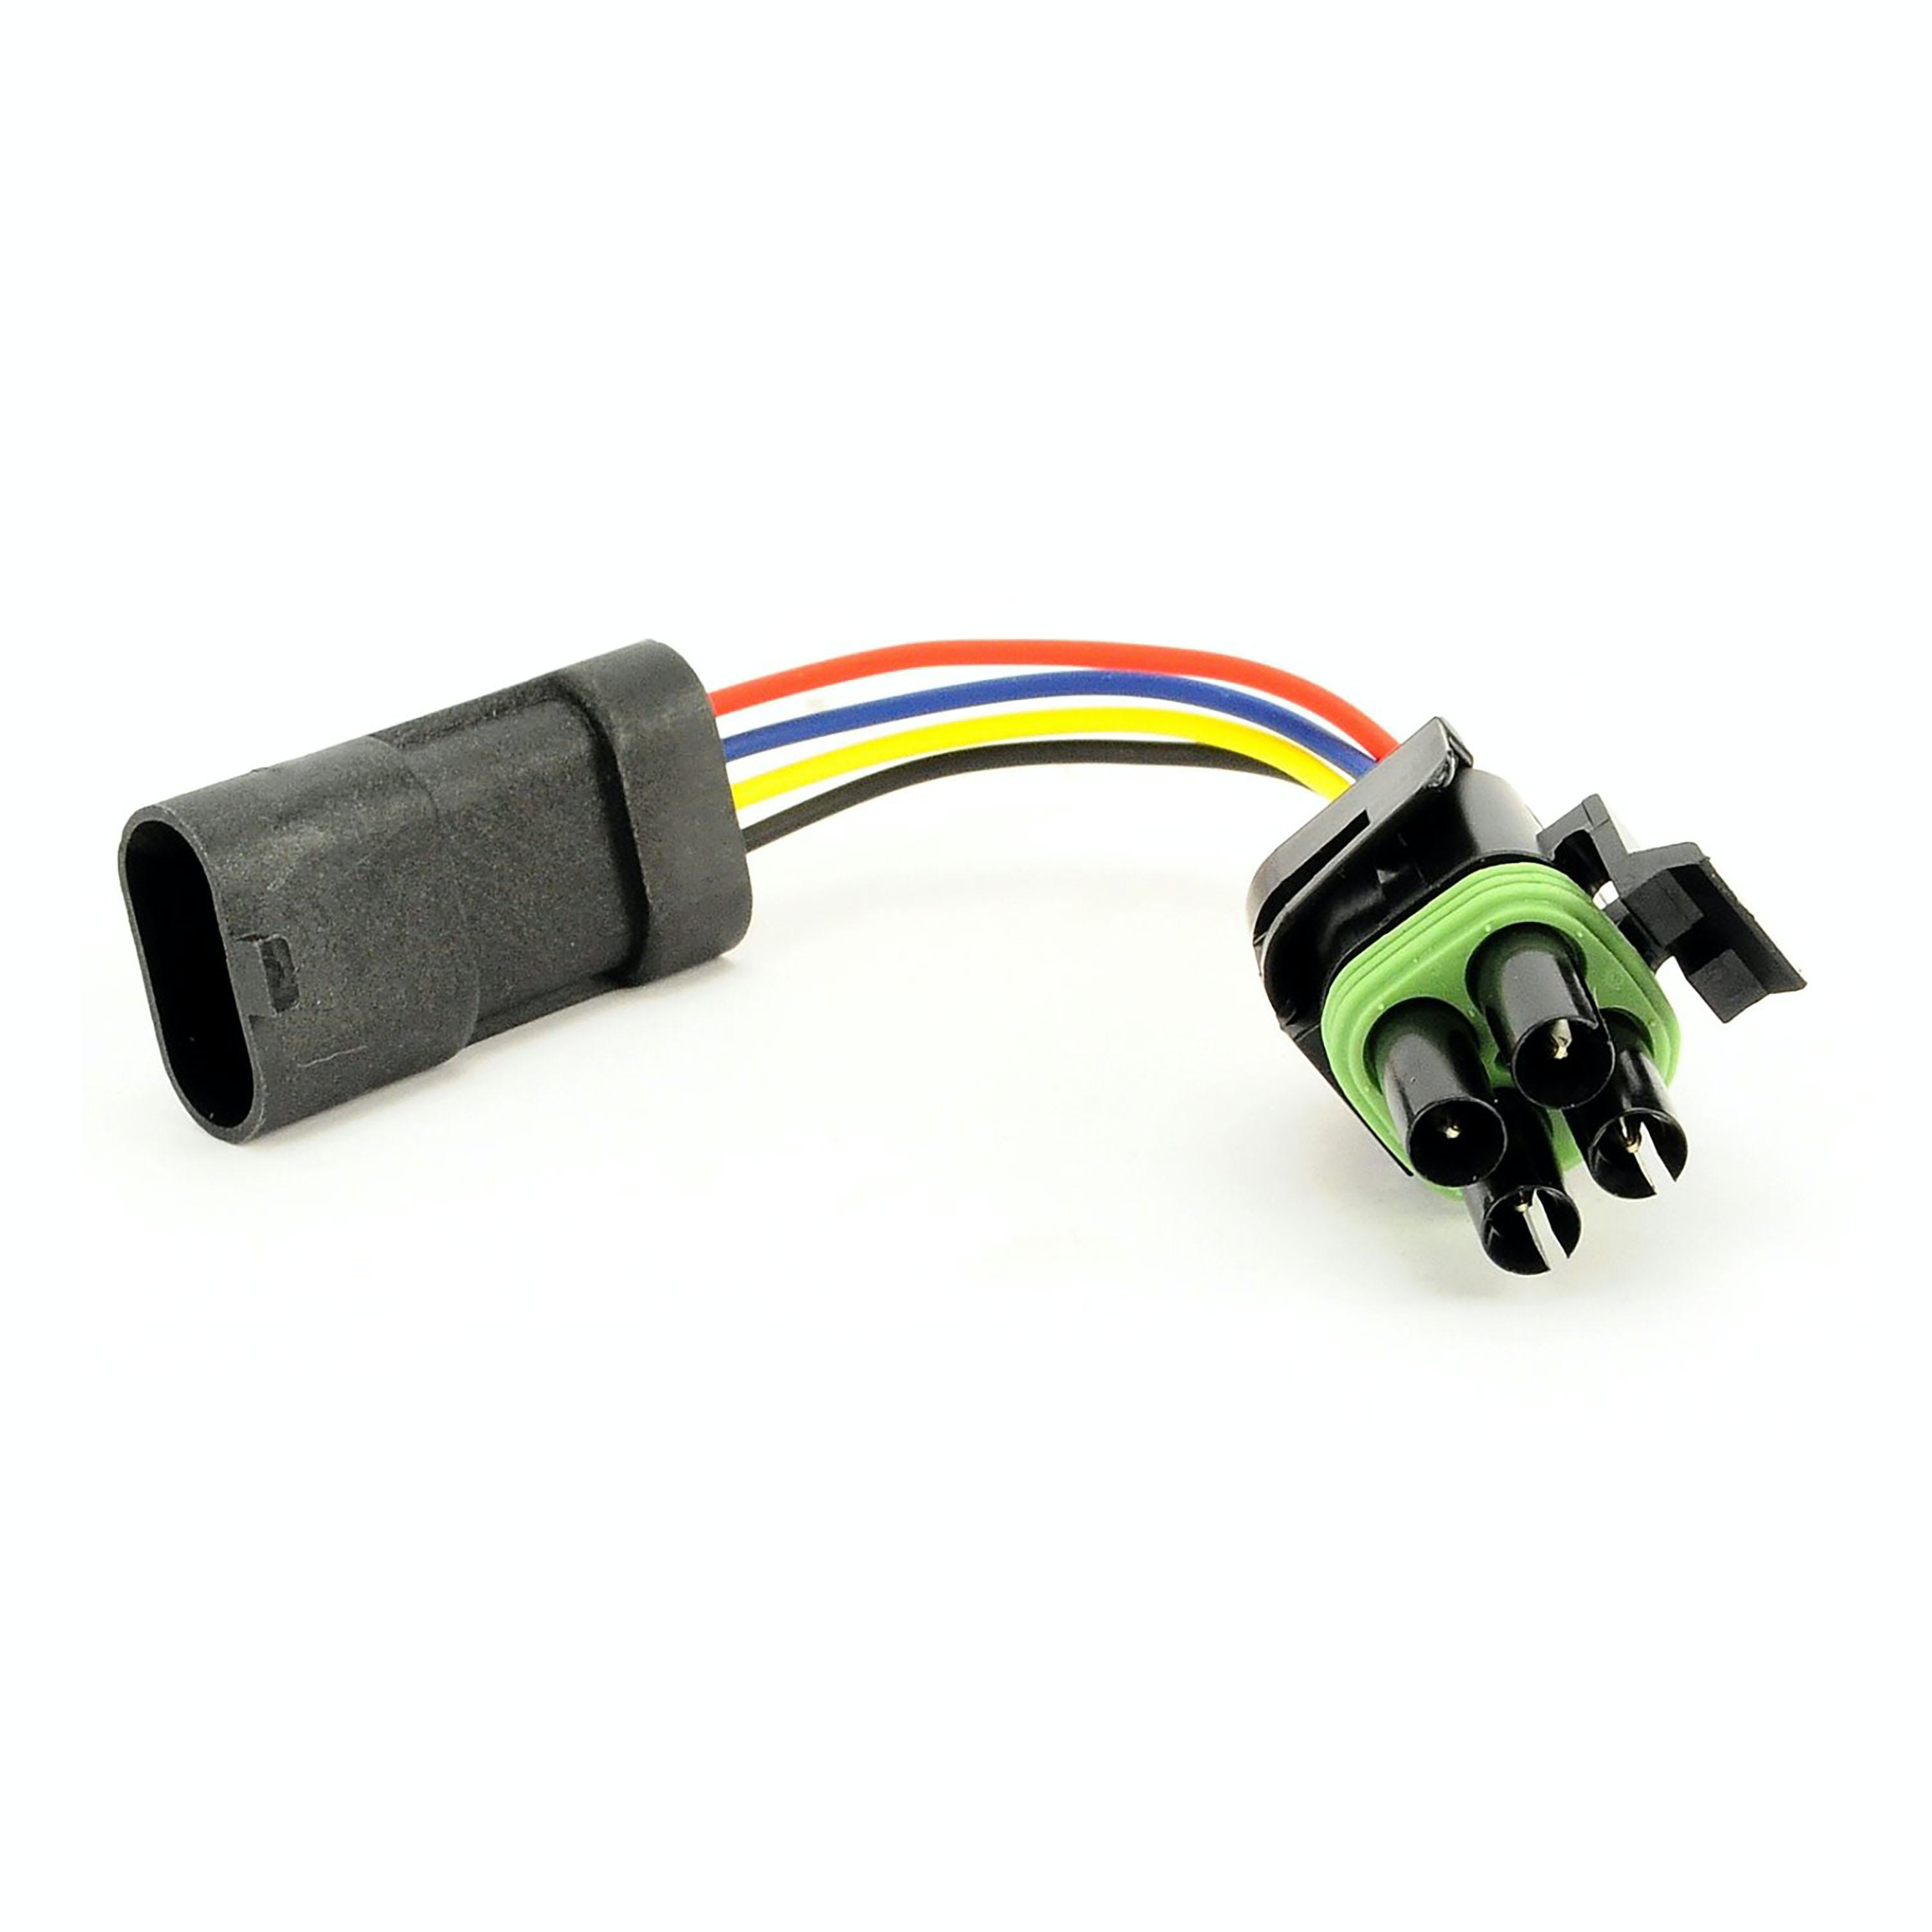 FAST - Fuel Air Spark Technology 308032 Early IAC to Newer Design EFI Harness Adapter